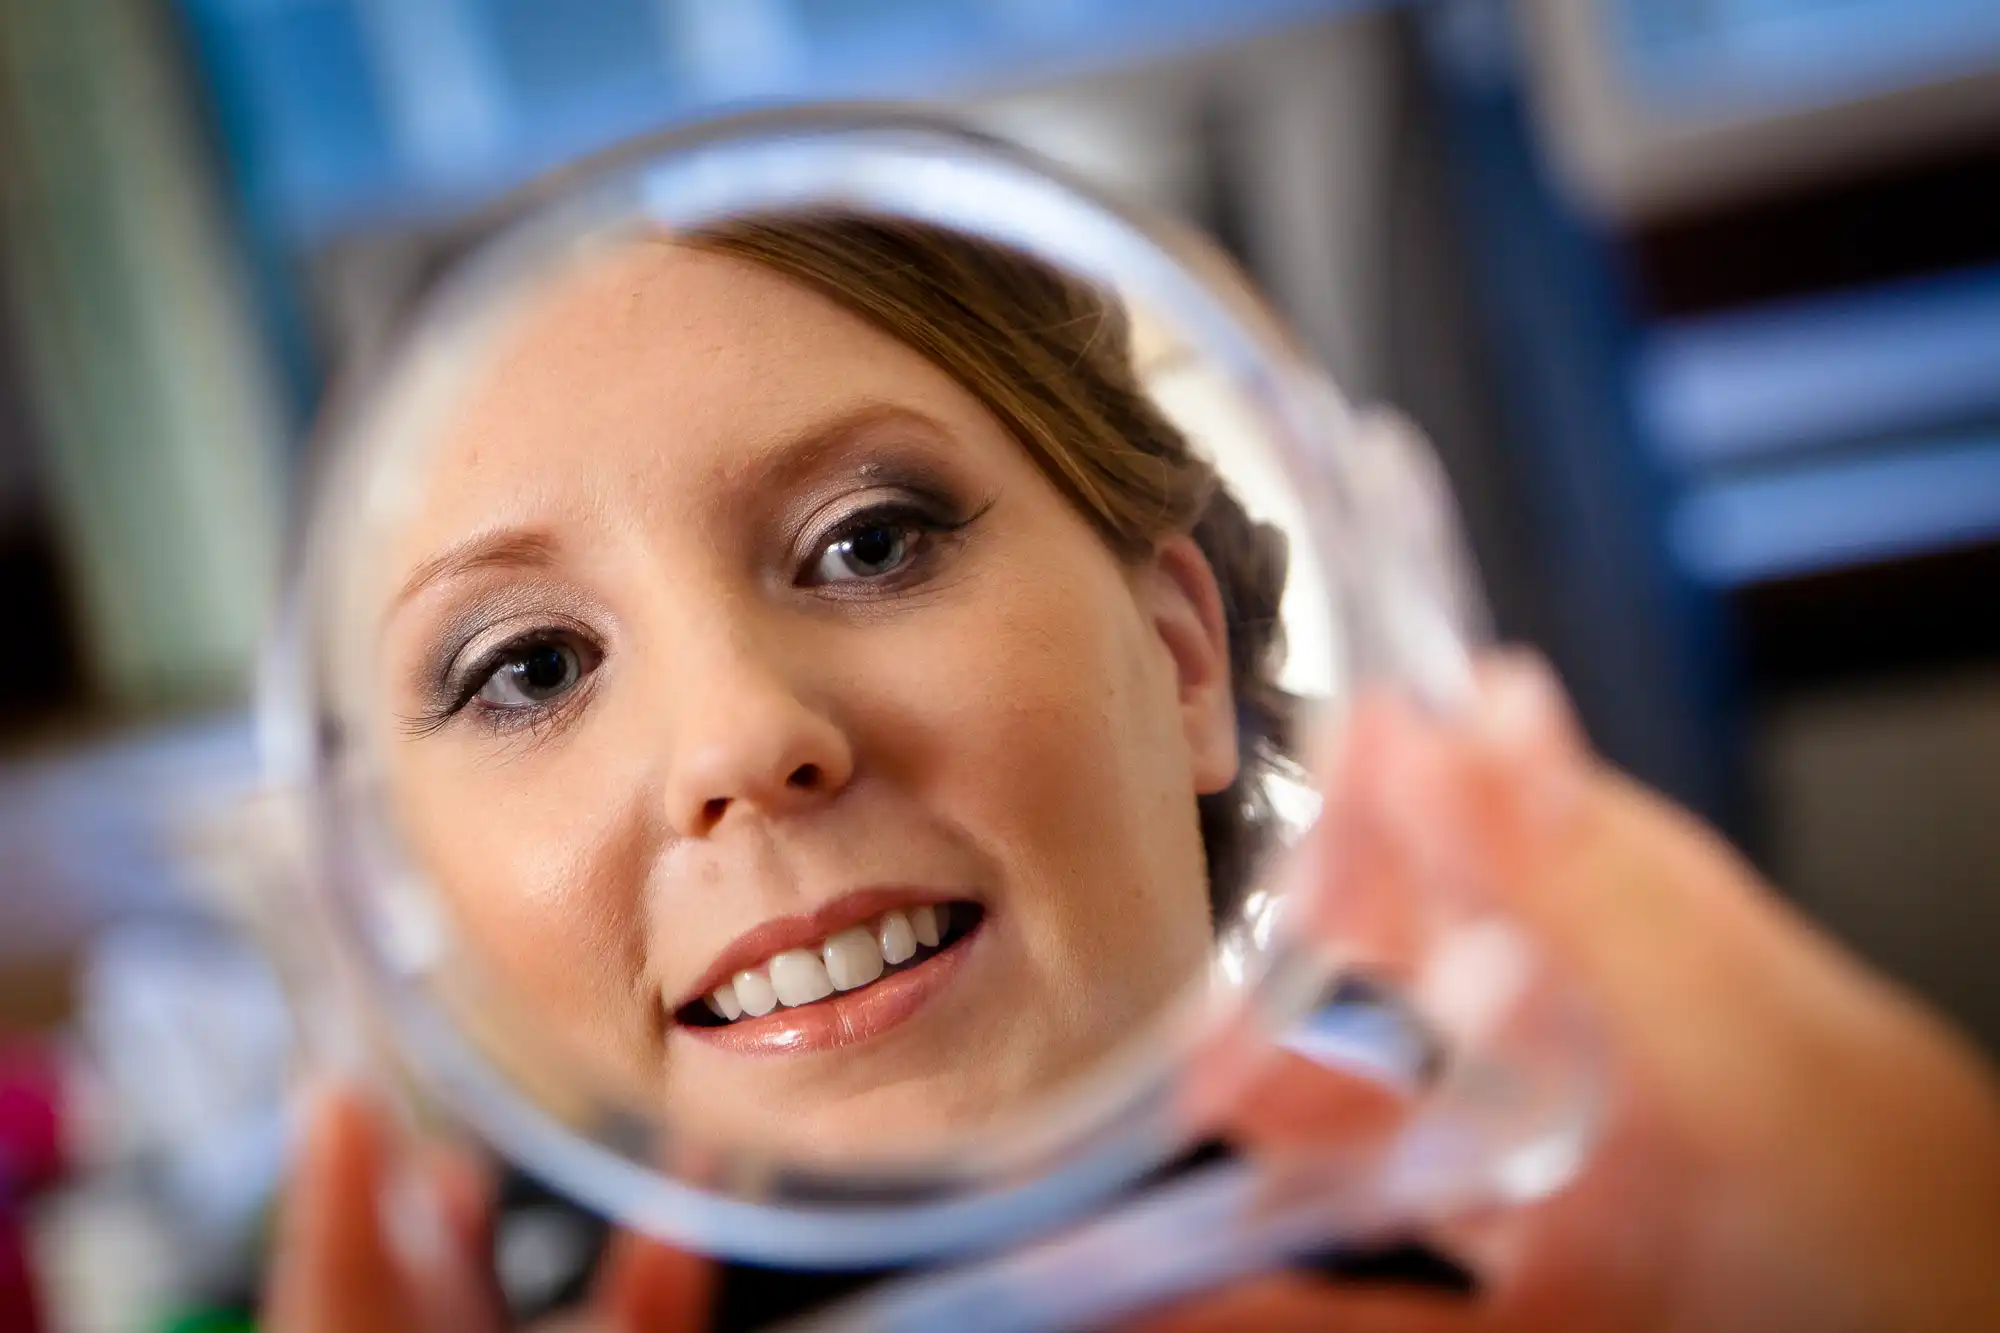 Woman applying makeup, looking into a handheld mirror. the viewpoint is through the mirror, focusing on her face with a blurred background.